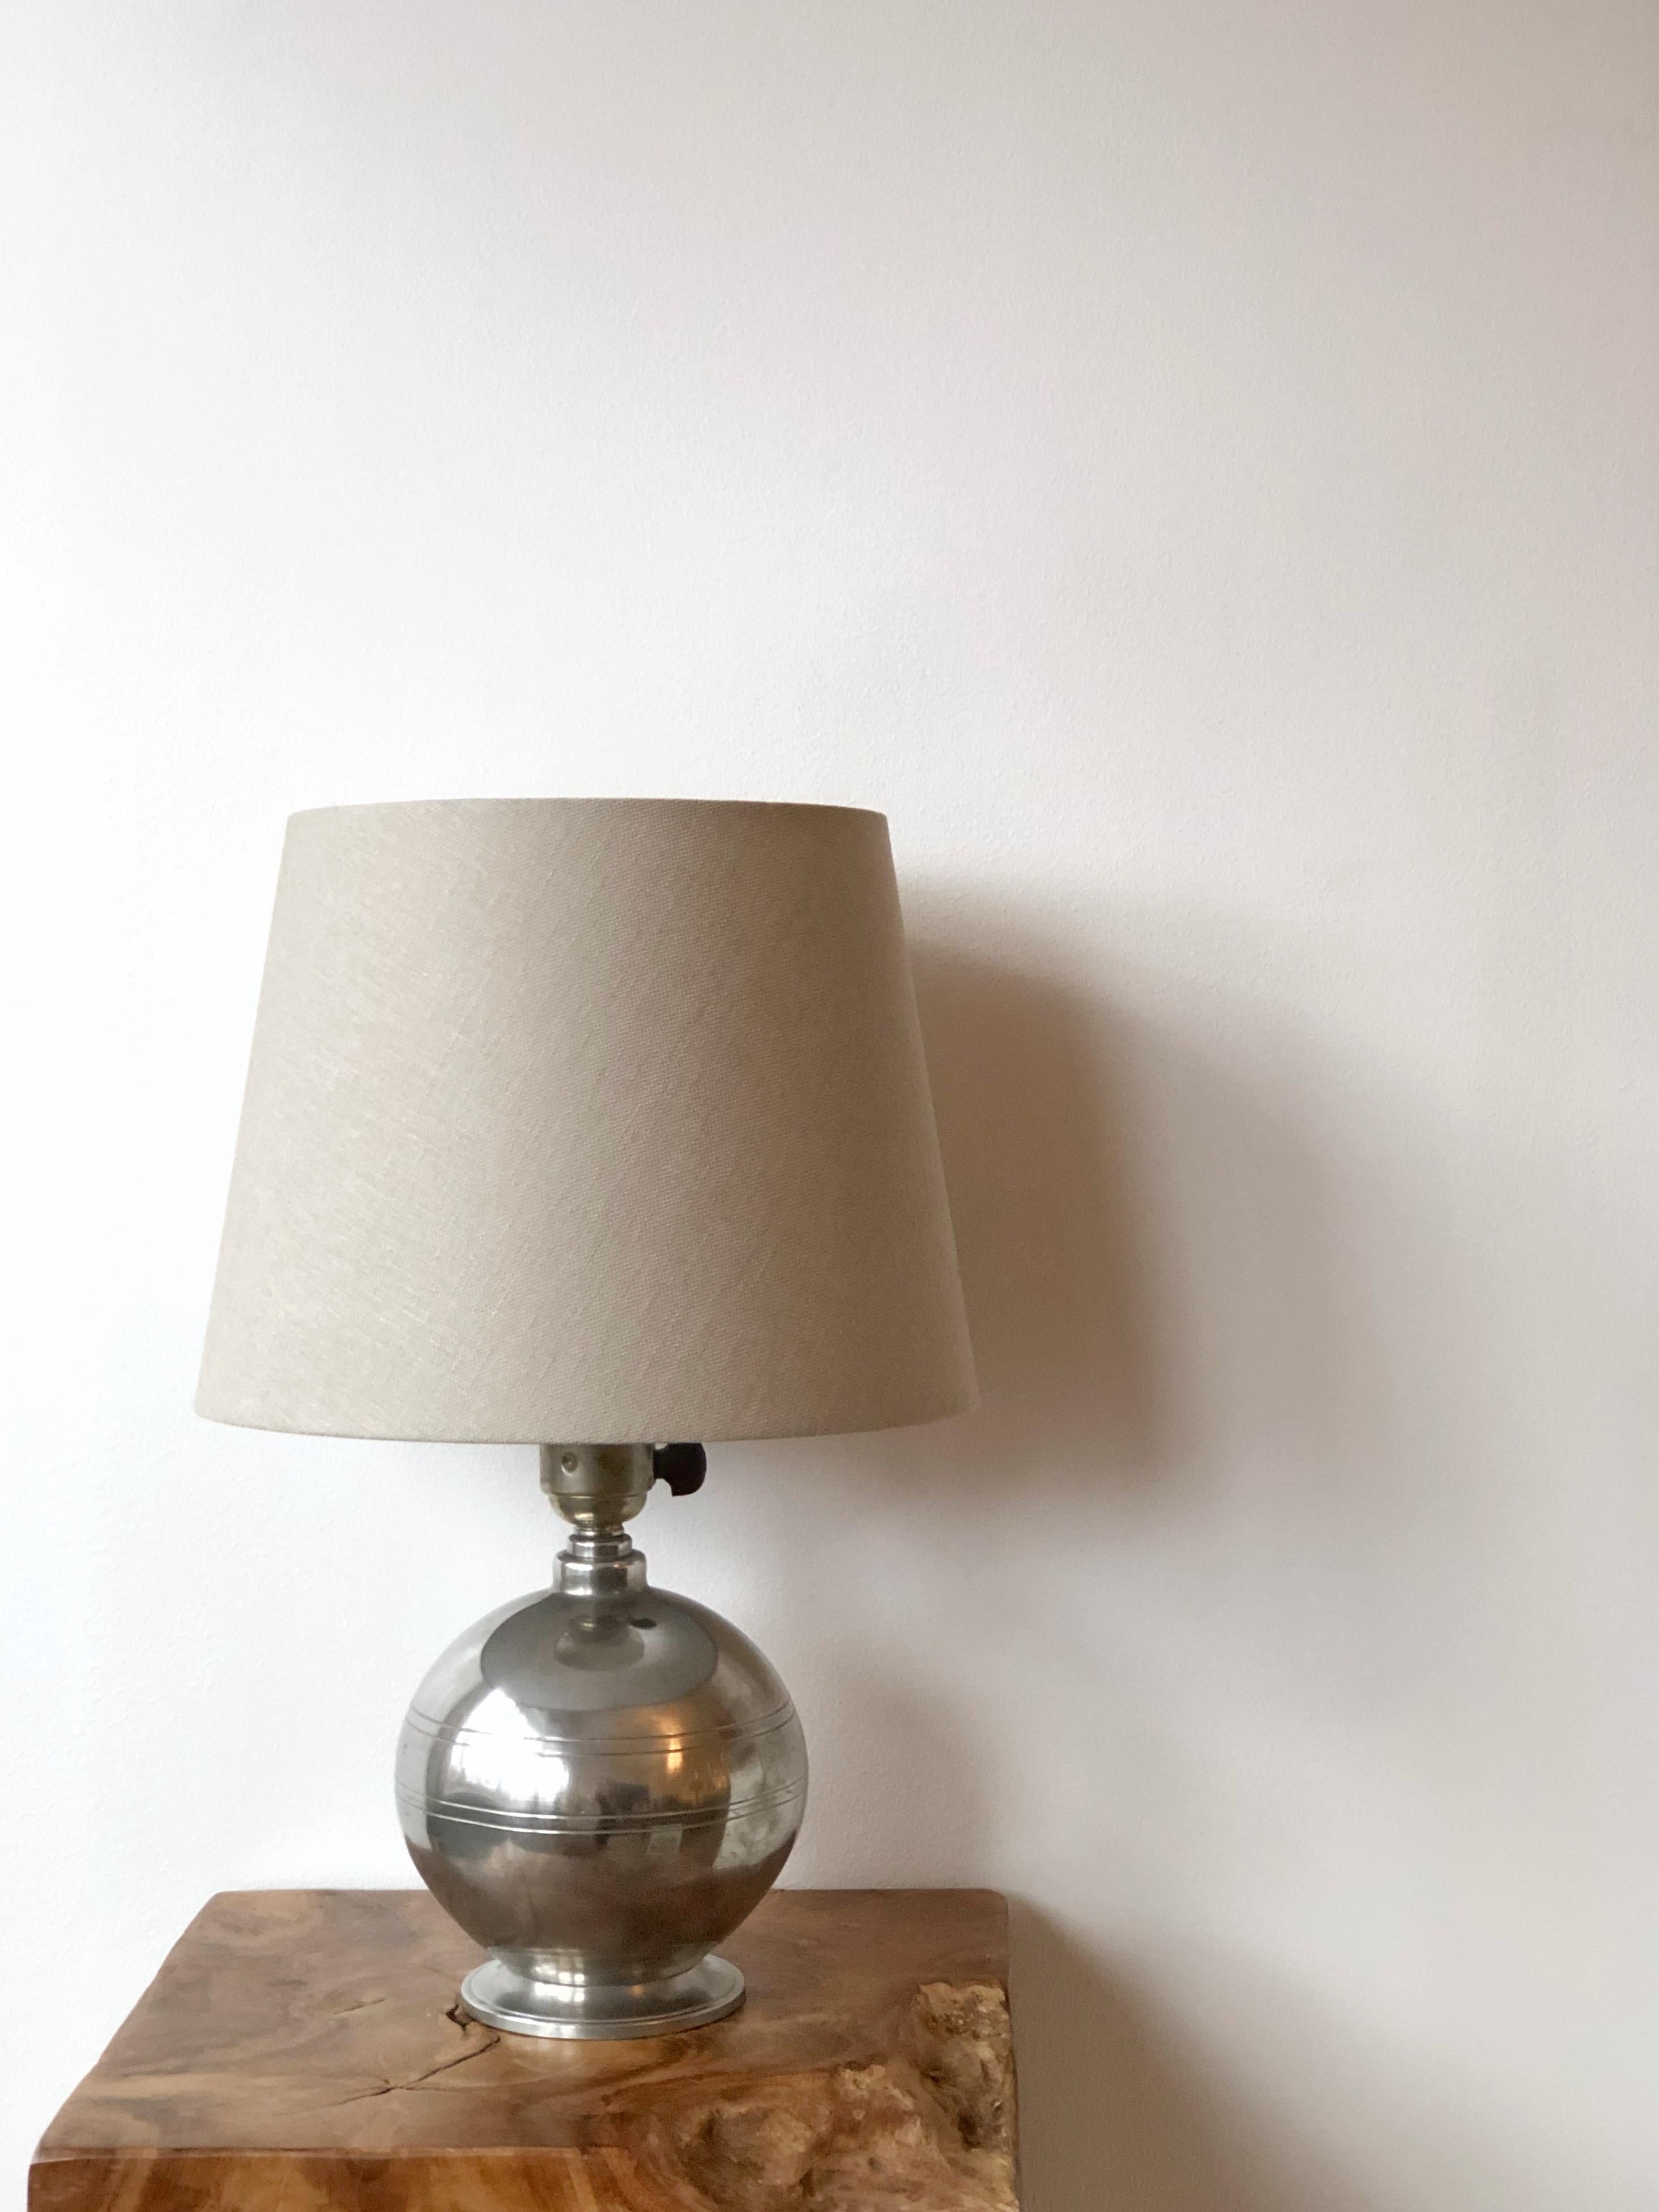 A Scandinavian Modern spherical pewter table lamp with a series of horizontal groves. Made by G.A.B. (Guldsmedsaktiebolaget), circa 1930s.

Good condition with light age related wear and patina.
New American wiring.
Shade is not